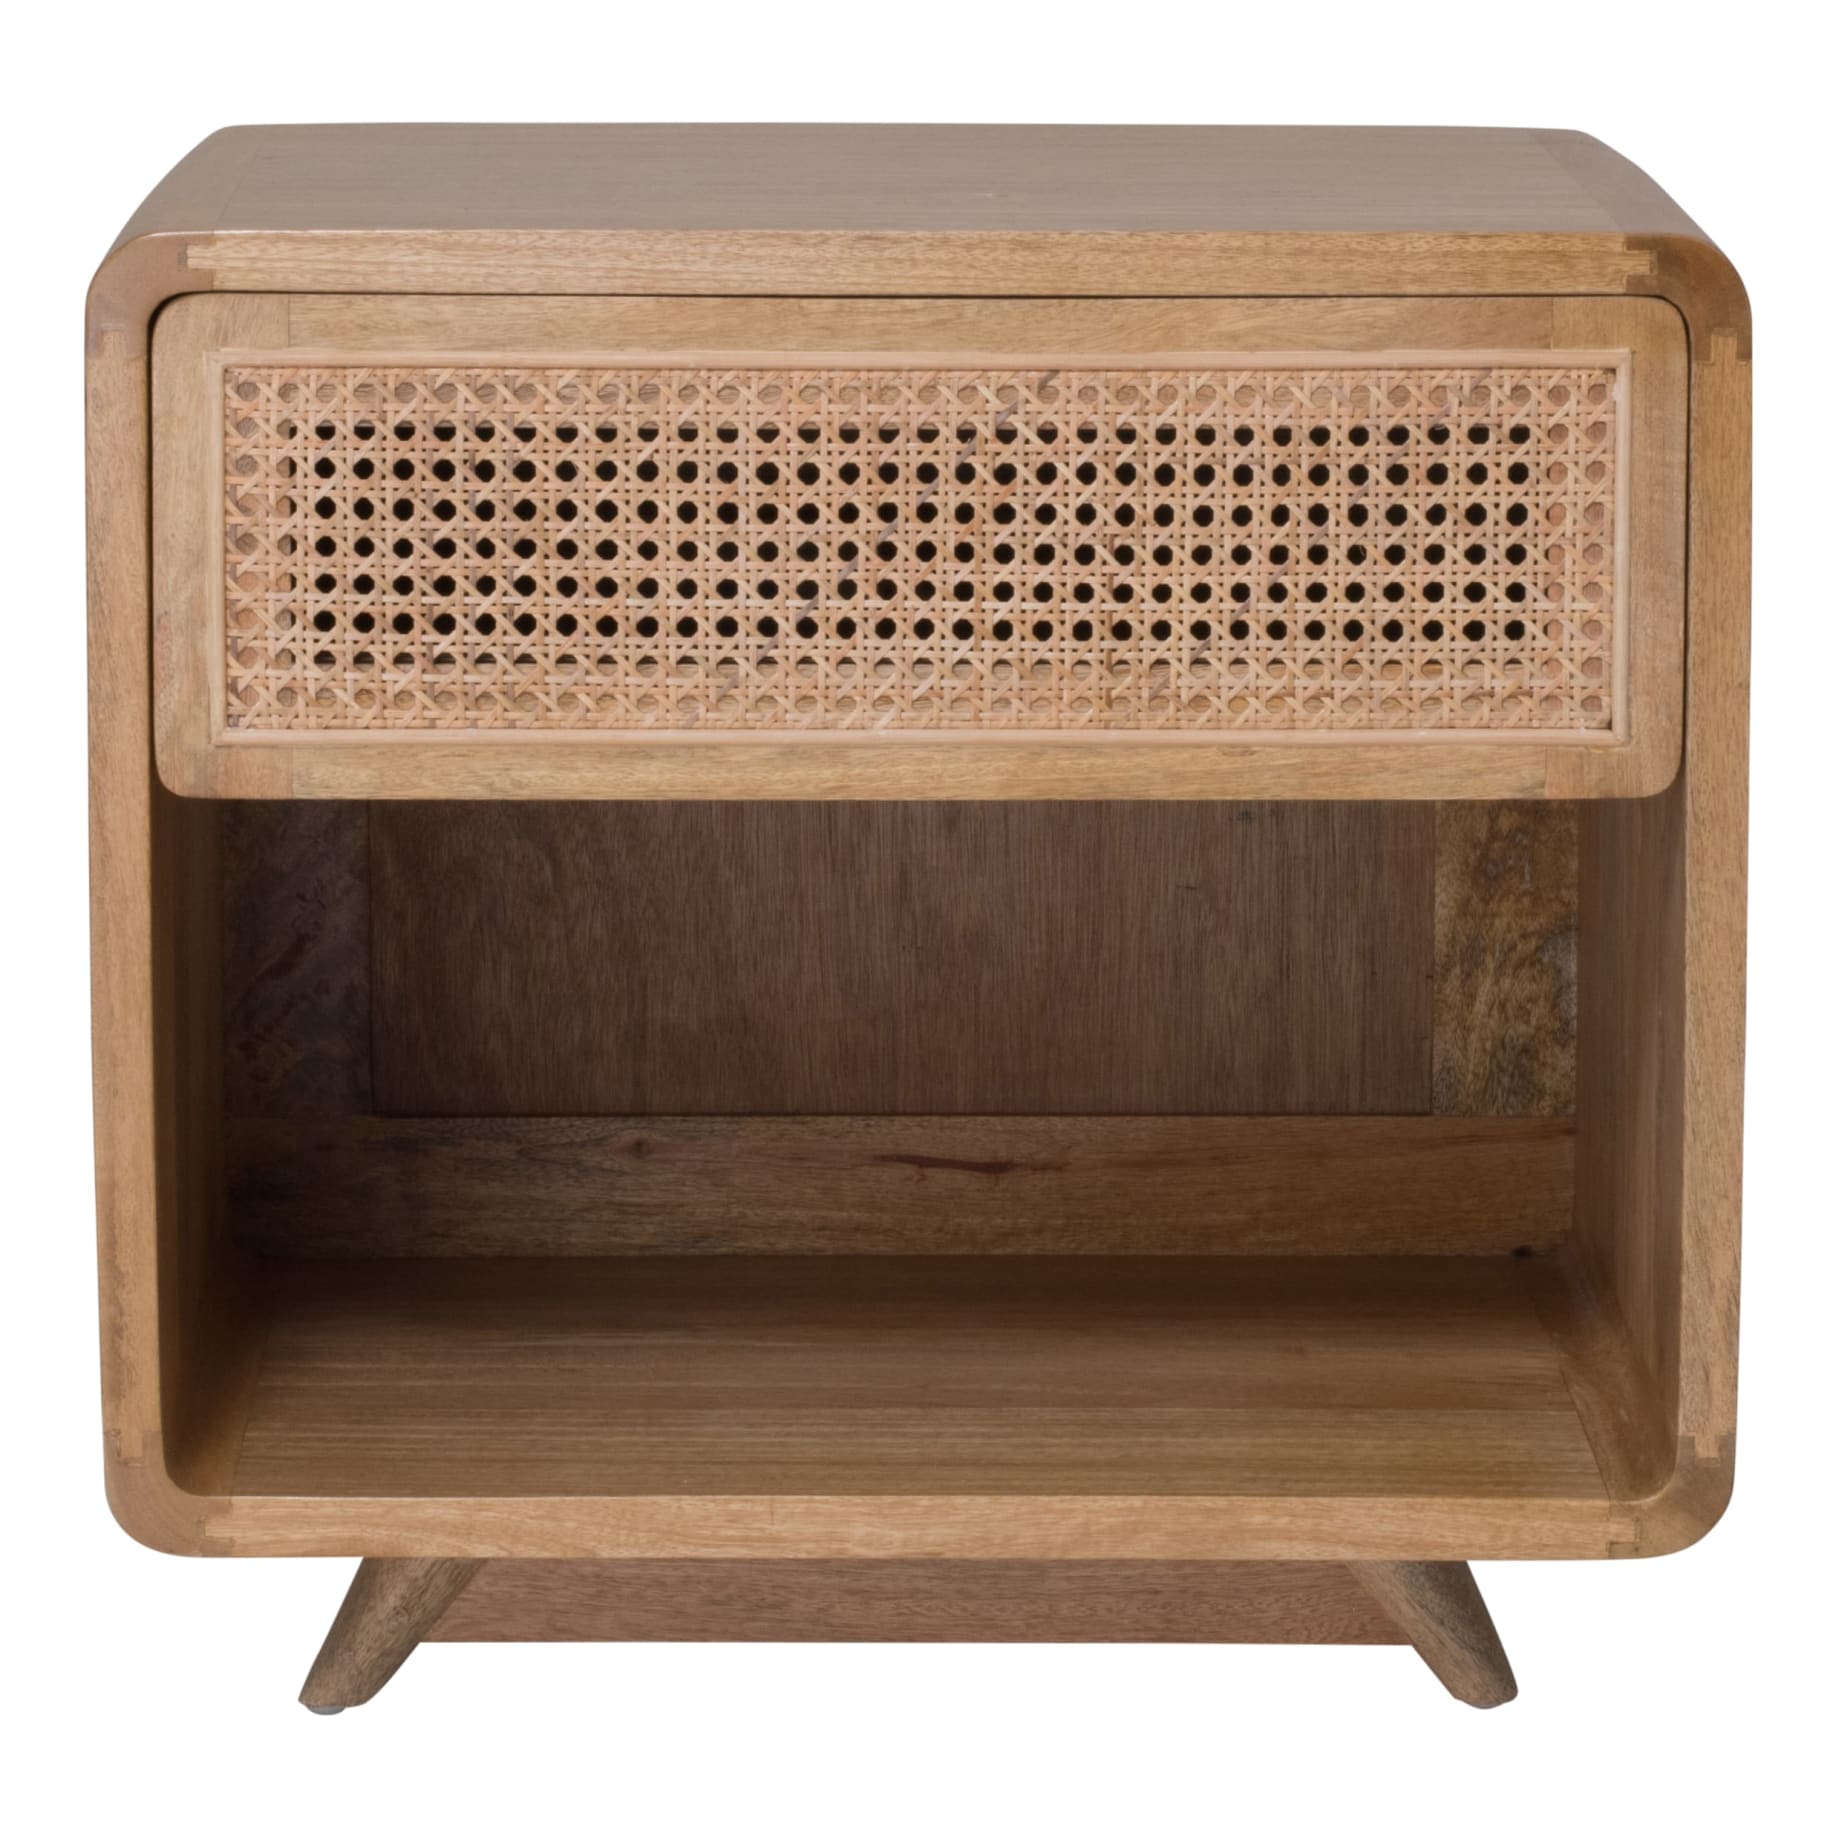 Willow Bedside Table 60cm in Mangowood Clear Lacquer / Rattan